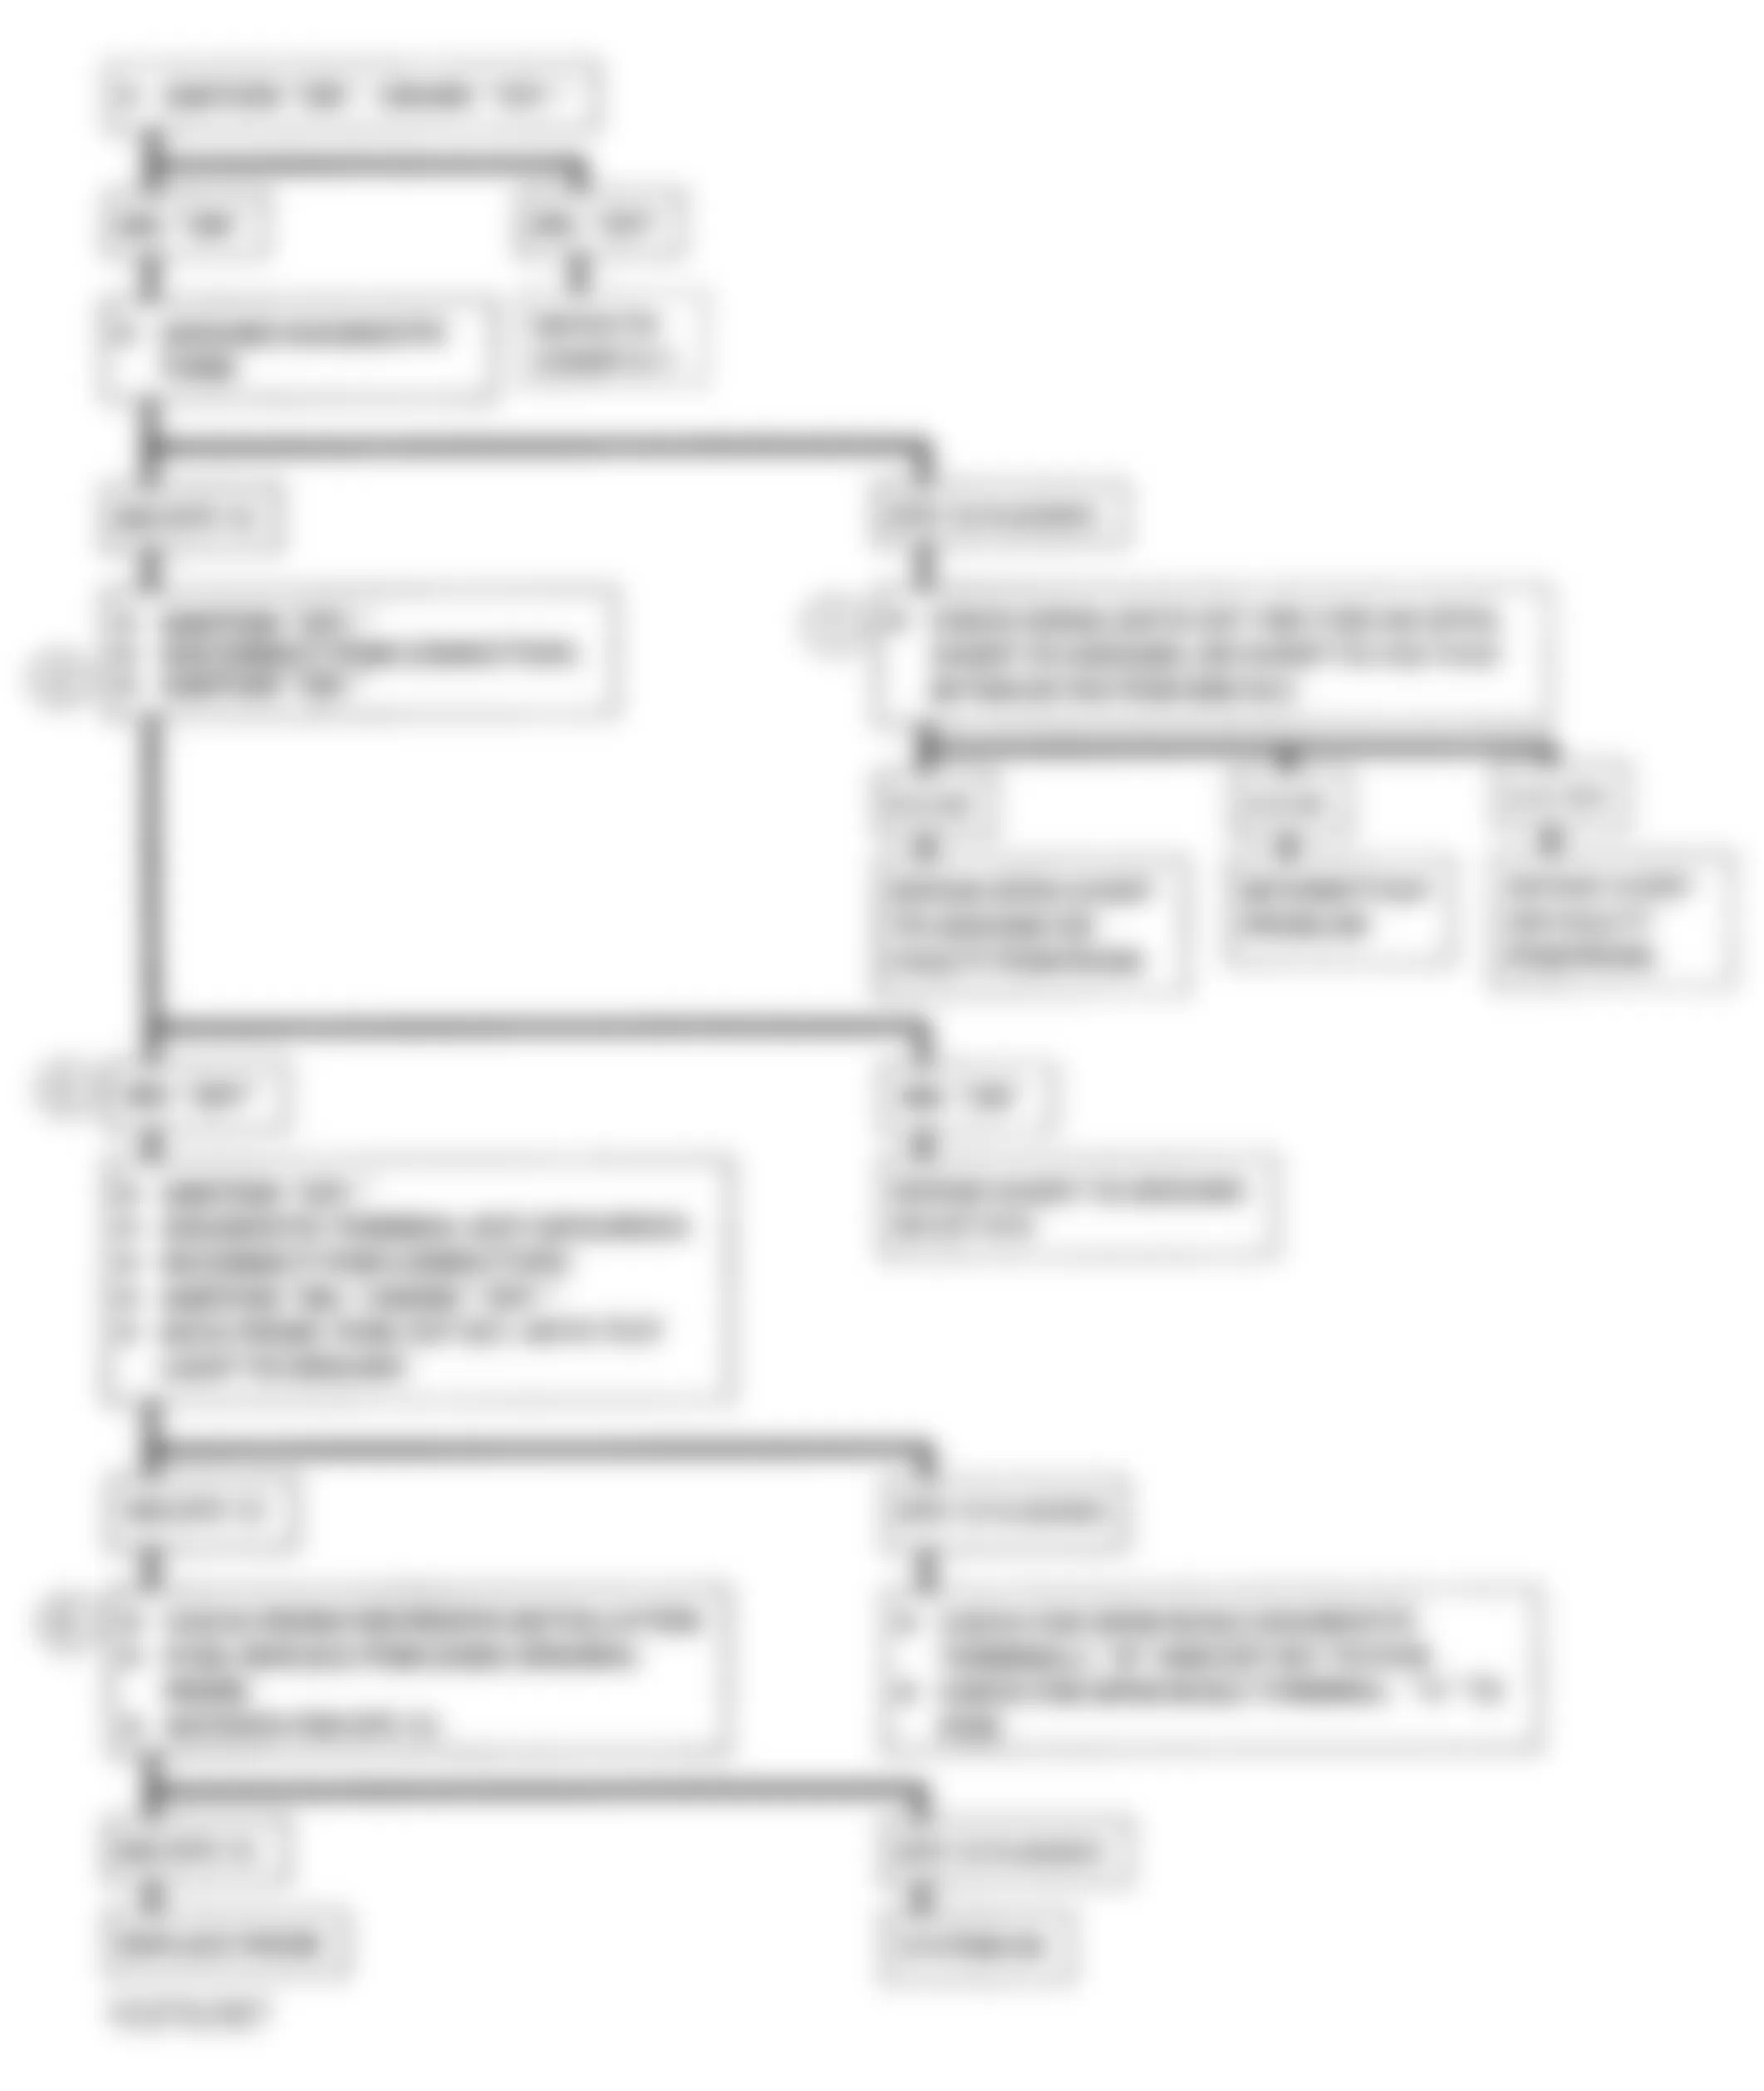 Chevrolet Pickup C3500 1993 - Component Locations -  A-2, Flowchart, No DLC Data, MIL On All Time - A/T